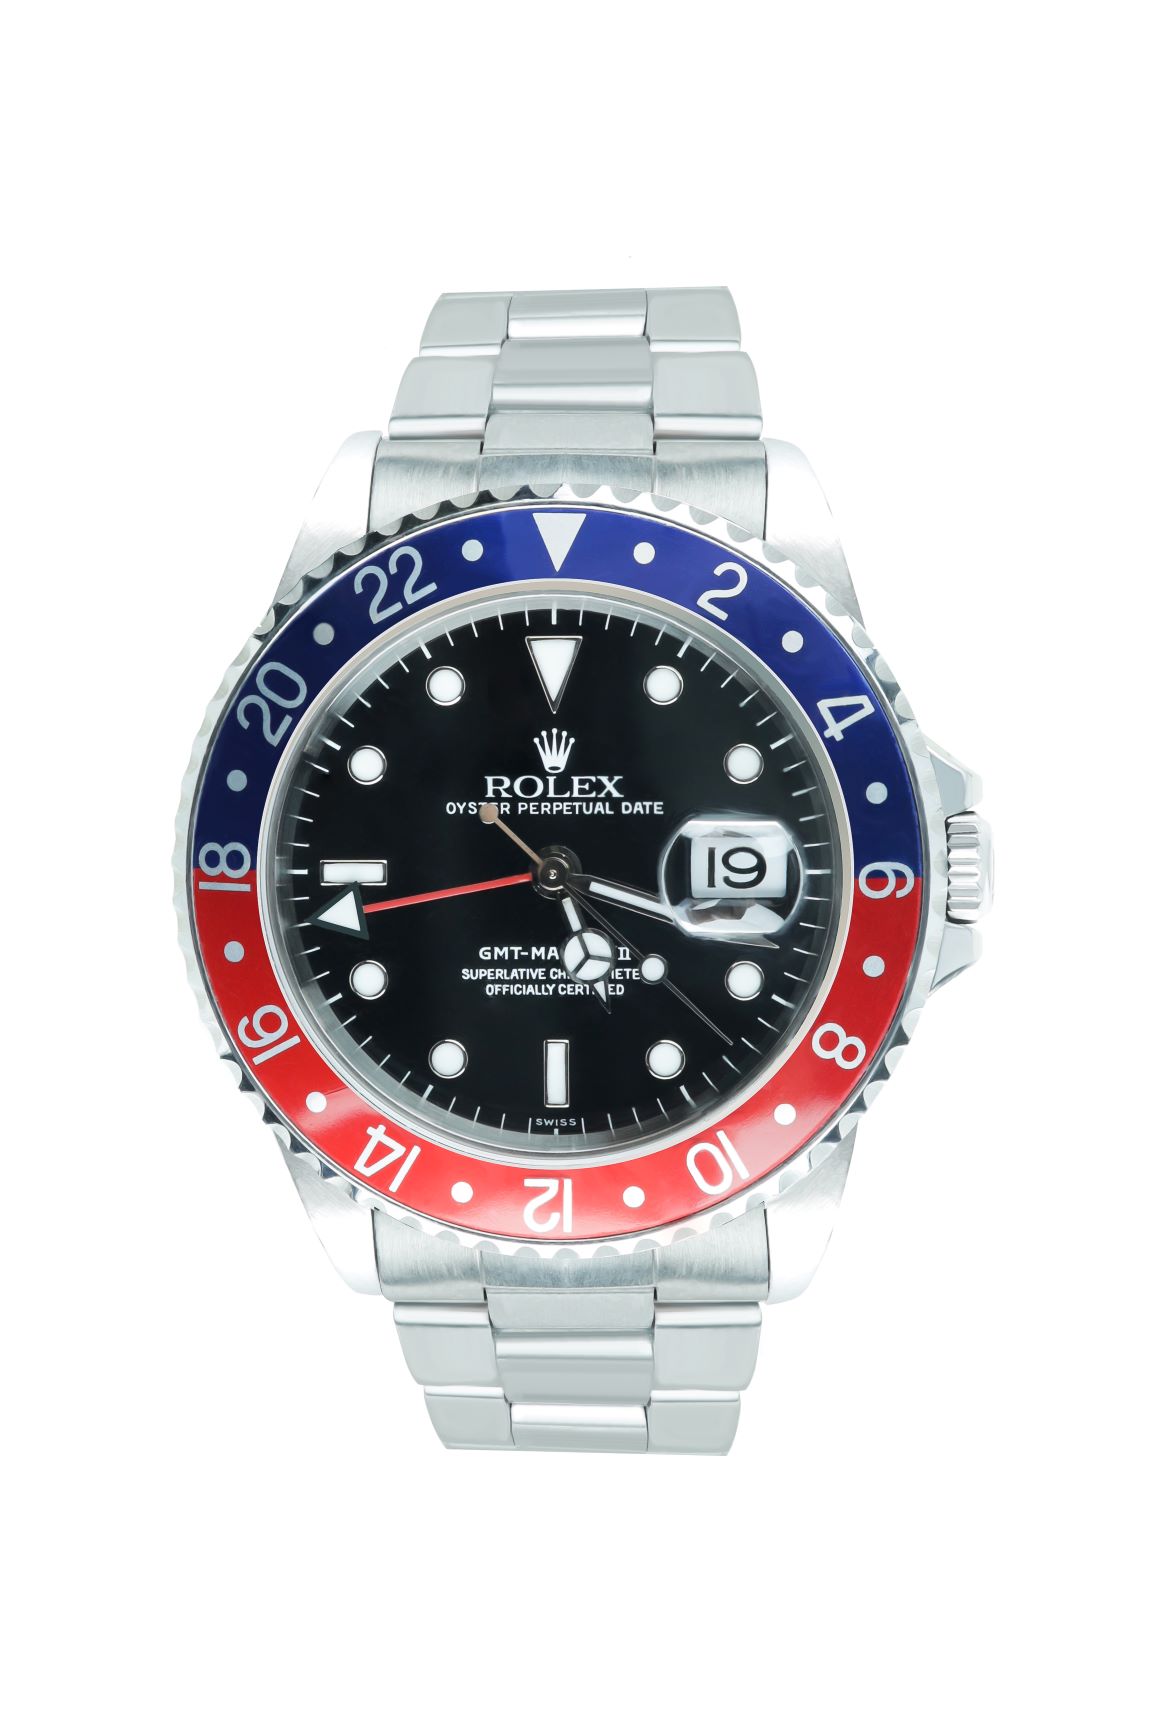 Pre-Owned GMT II "Pepsi" Bezel 16700 Stainless Timepiece